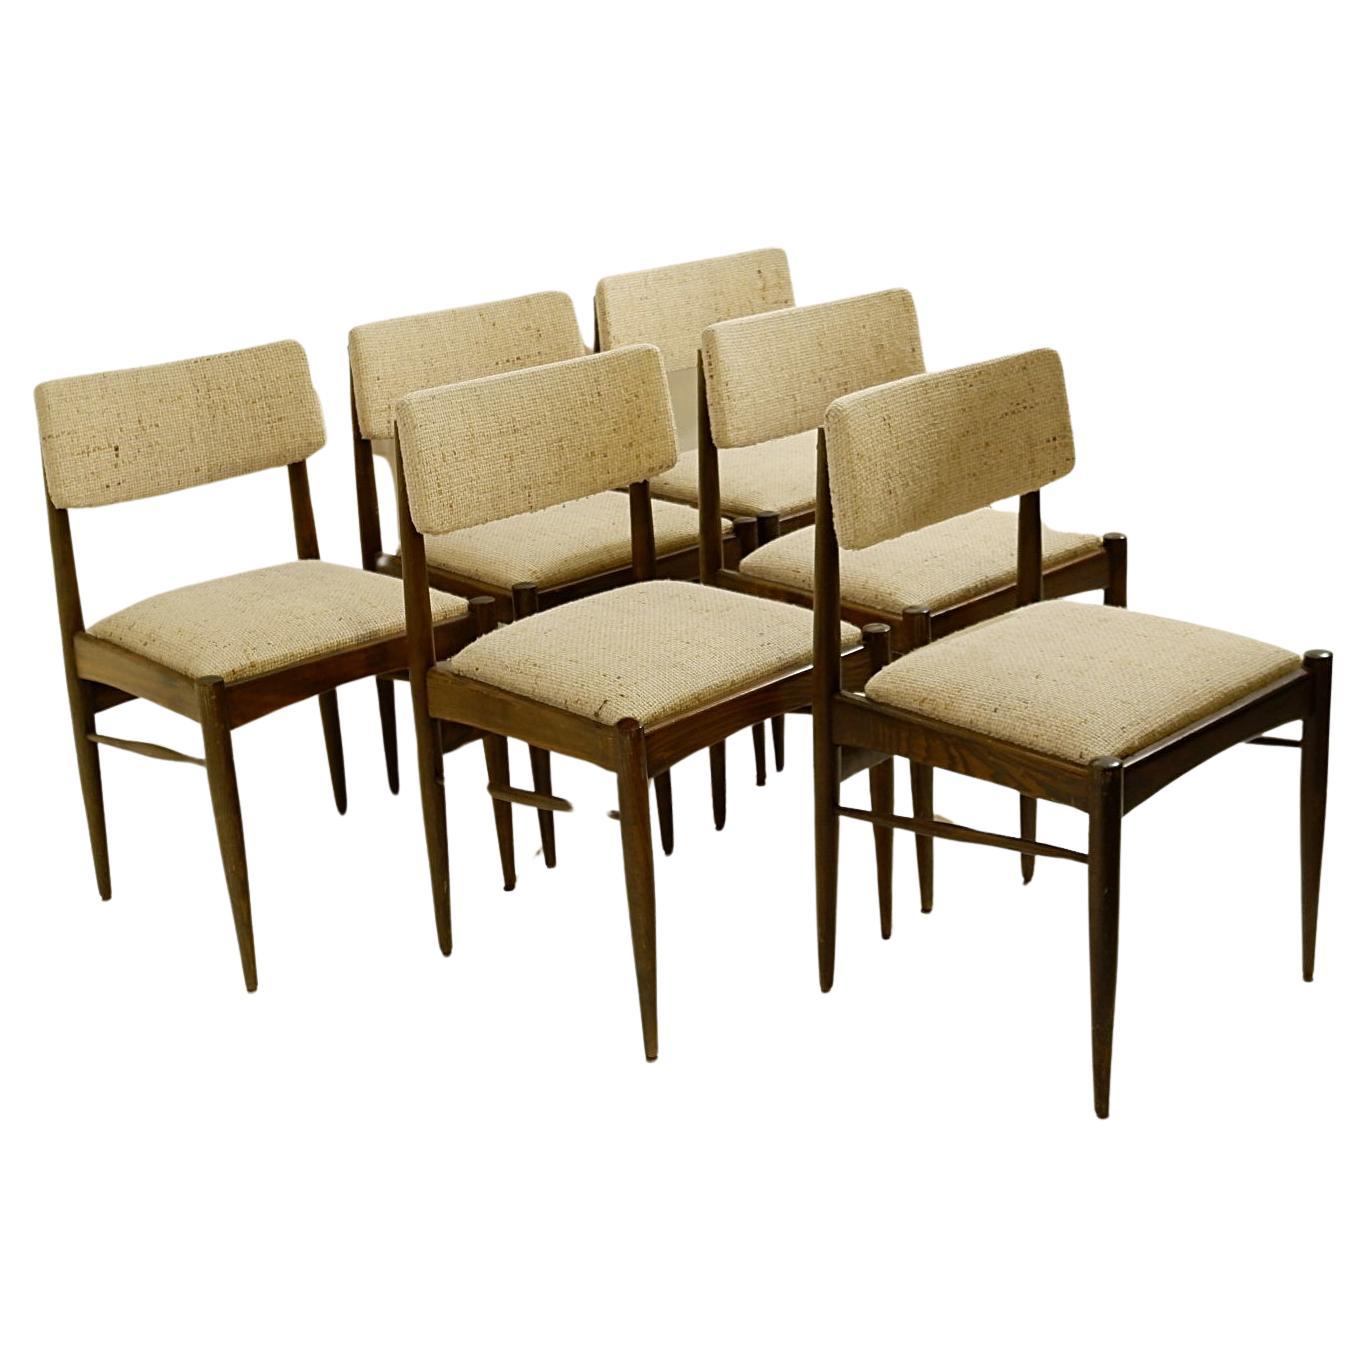 Set Of 6 Mid-century modern Vintage Dining Chairs, 1970'S